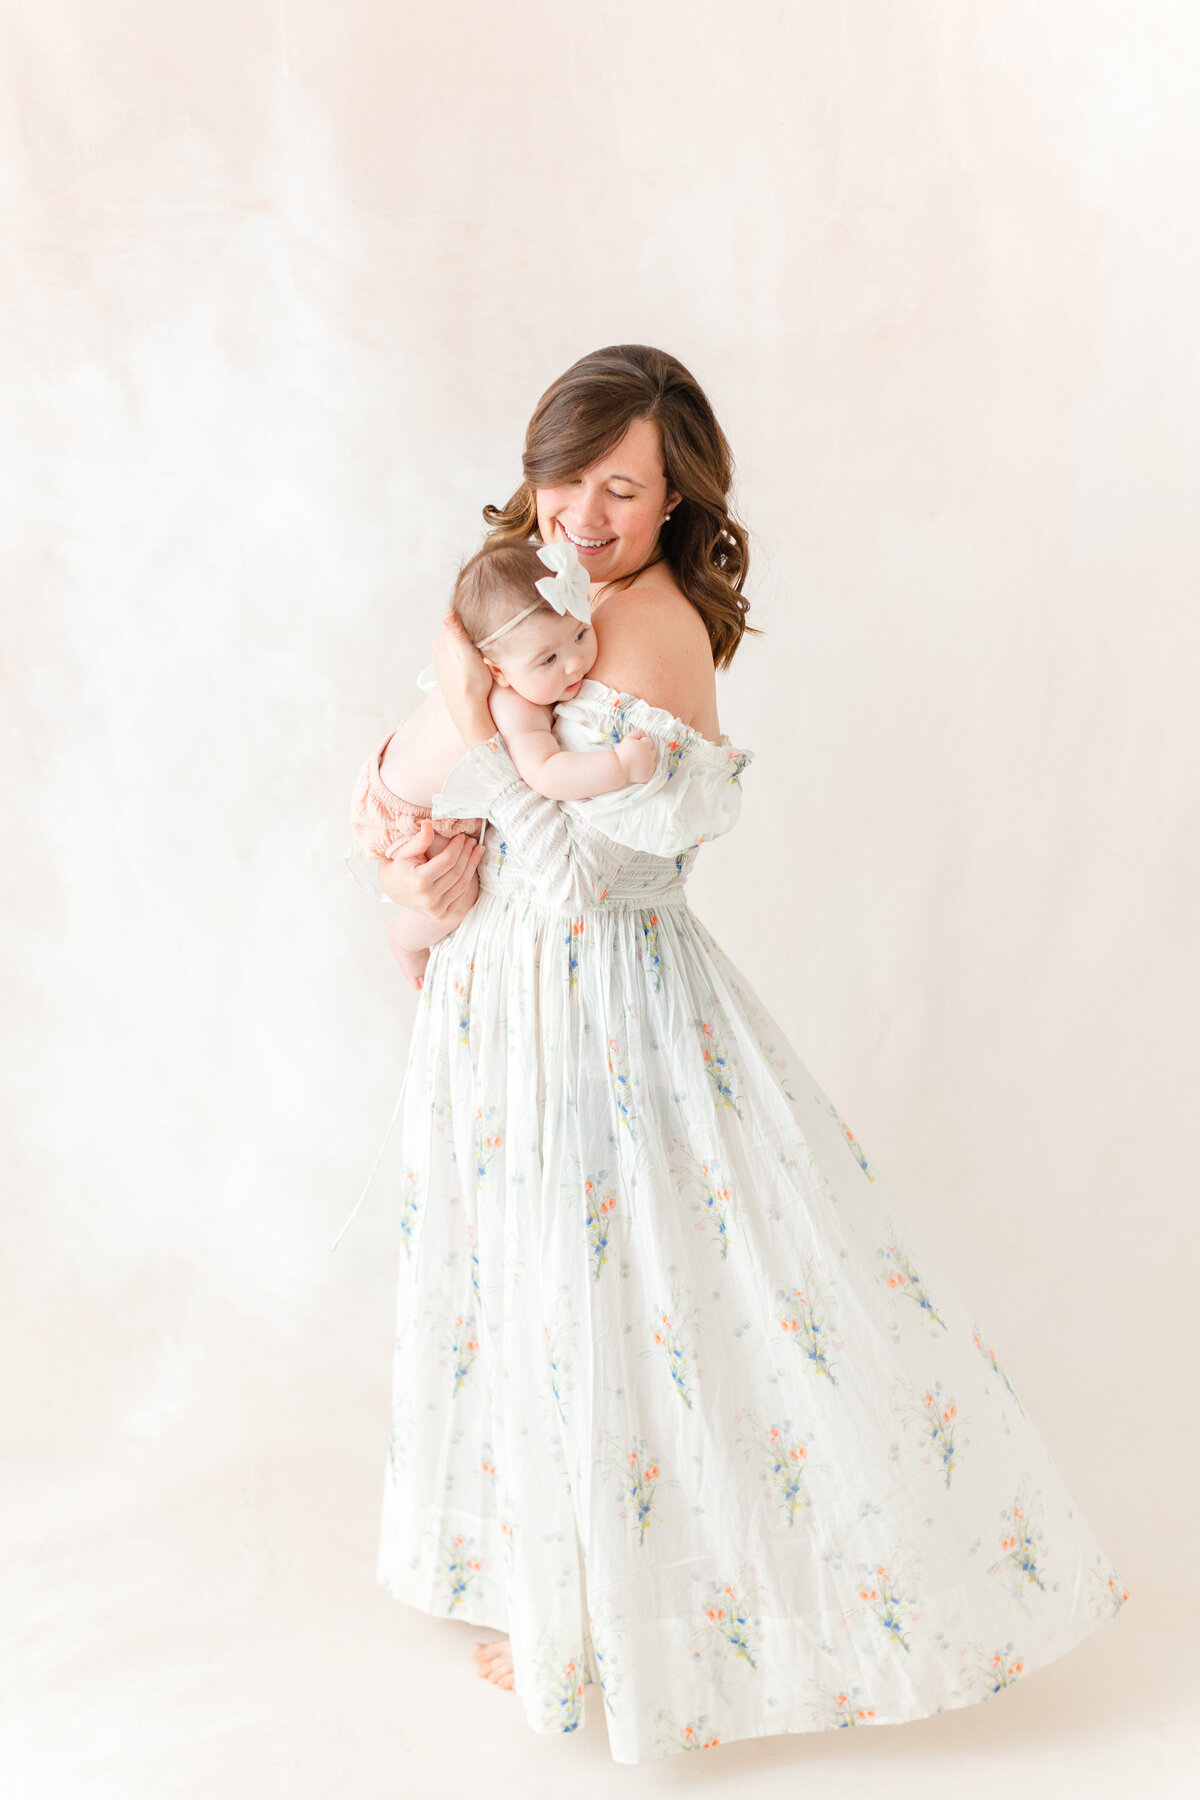 A Northern Virginia Newborn Photography photo of a mama twirling around holding her infant in her arms in front of a hand-painted canvas backdrop